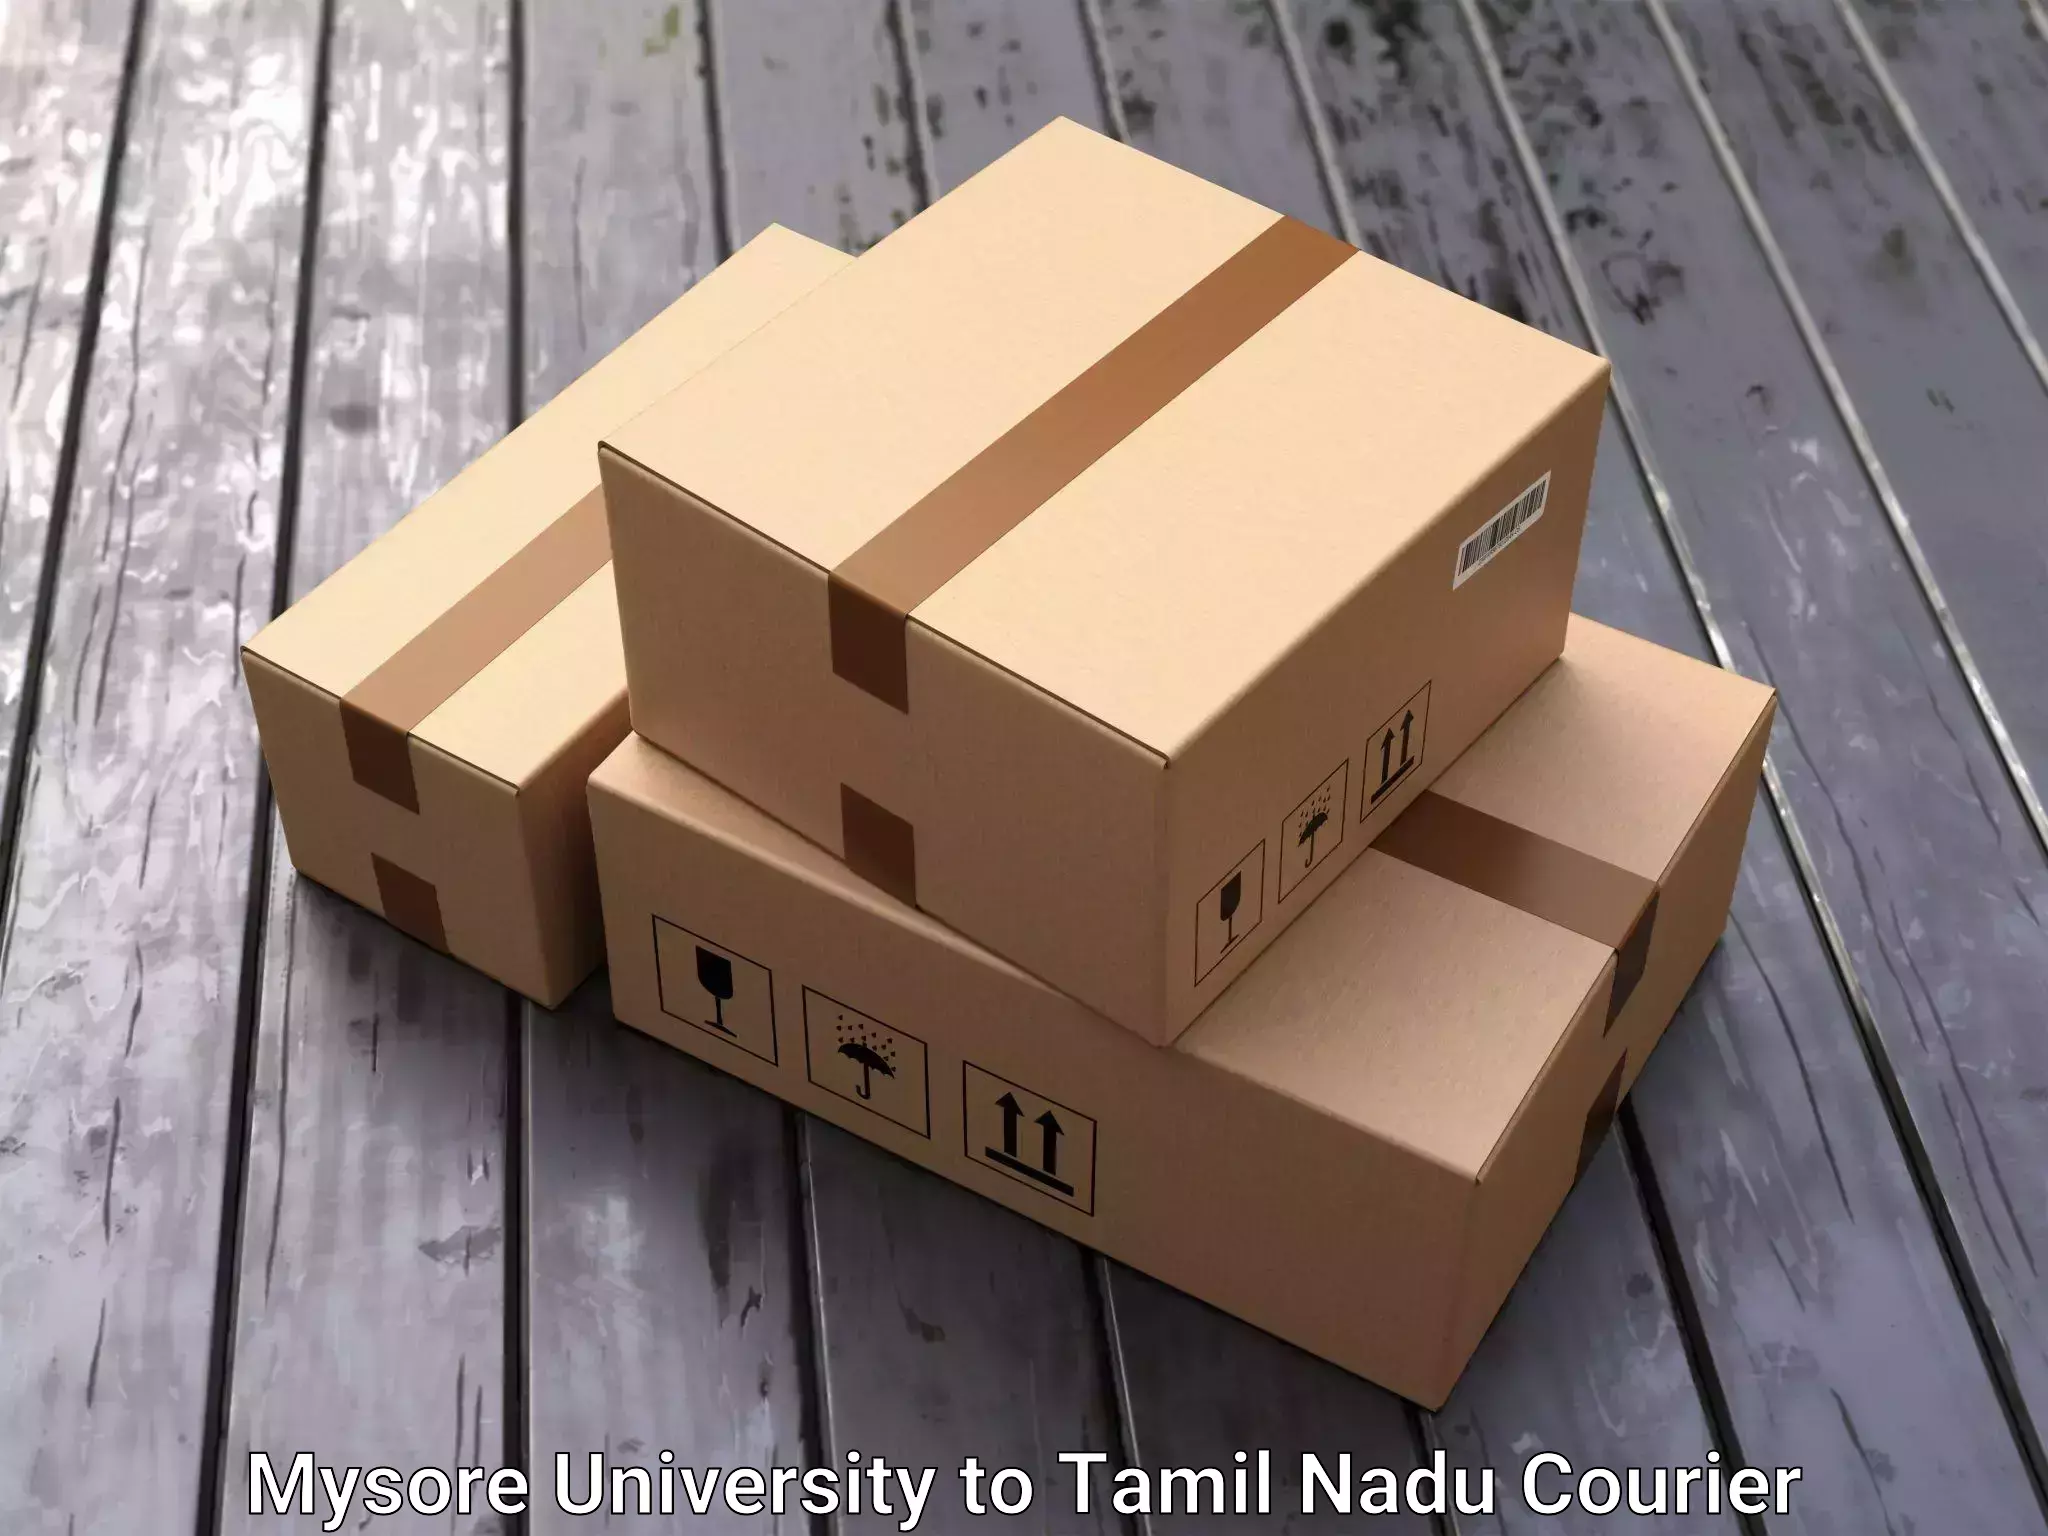 Household moving and storage Mysore University to SRM Institute of Science and Technology Chennai